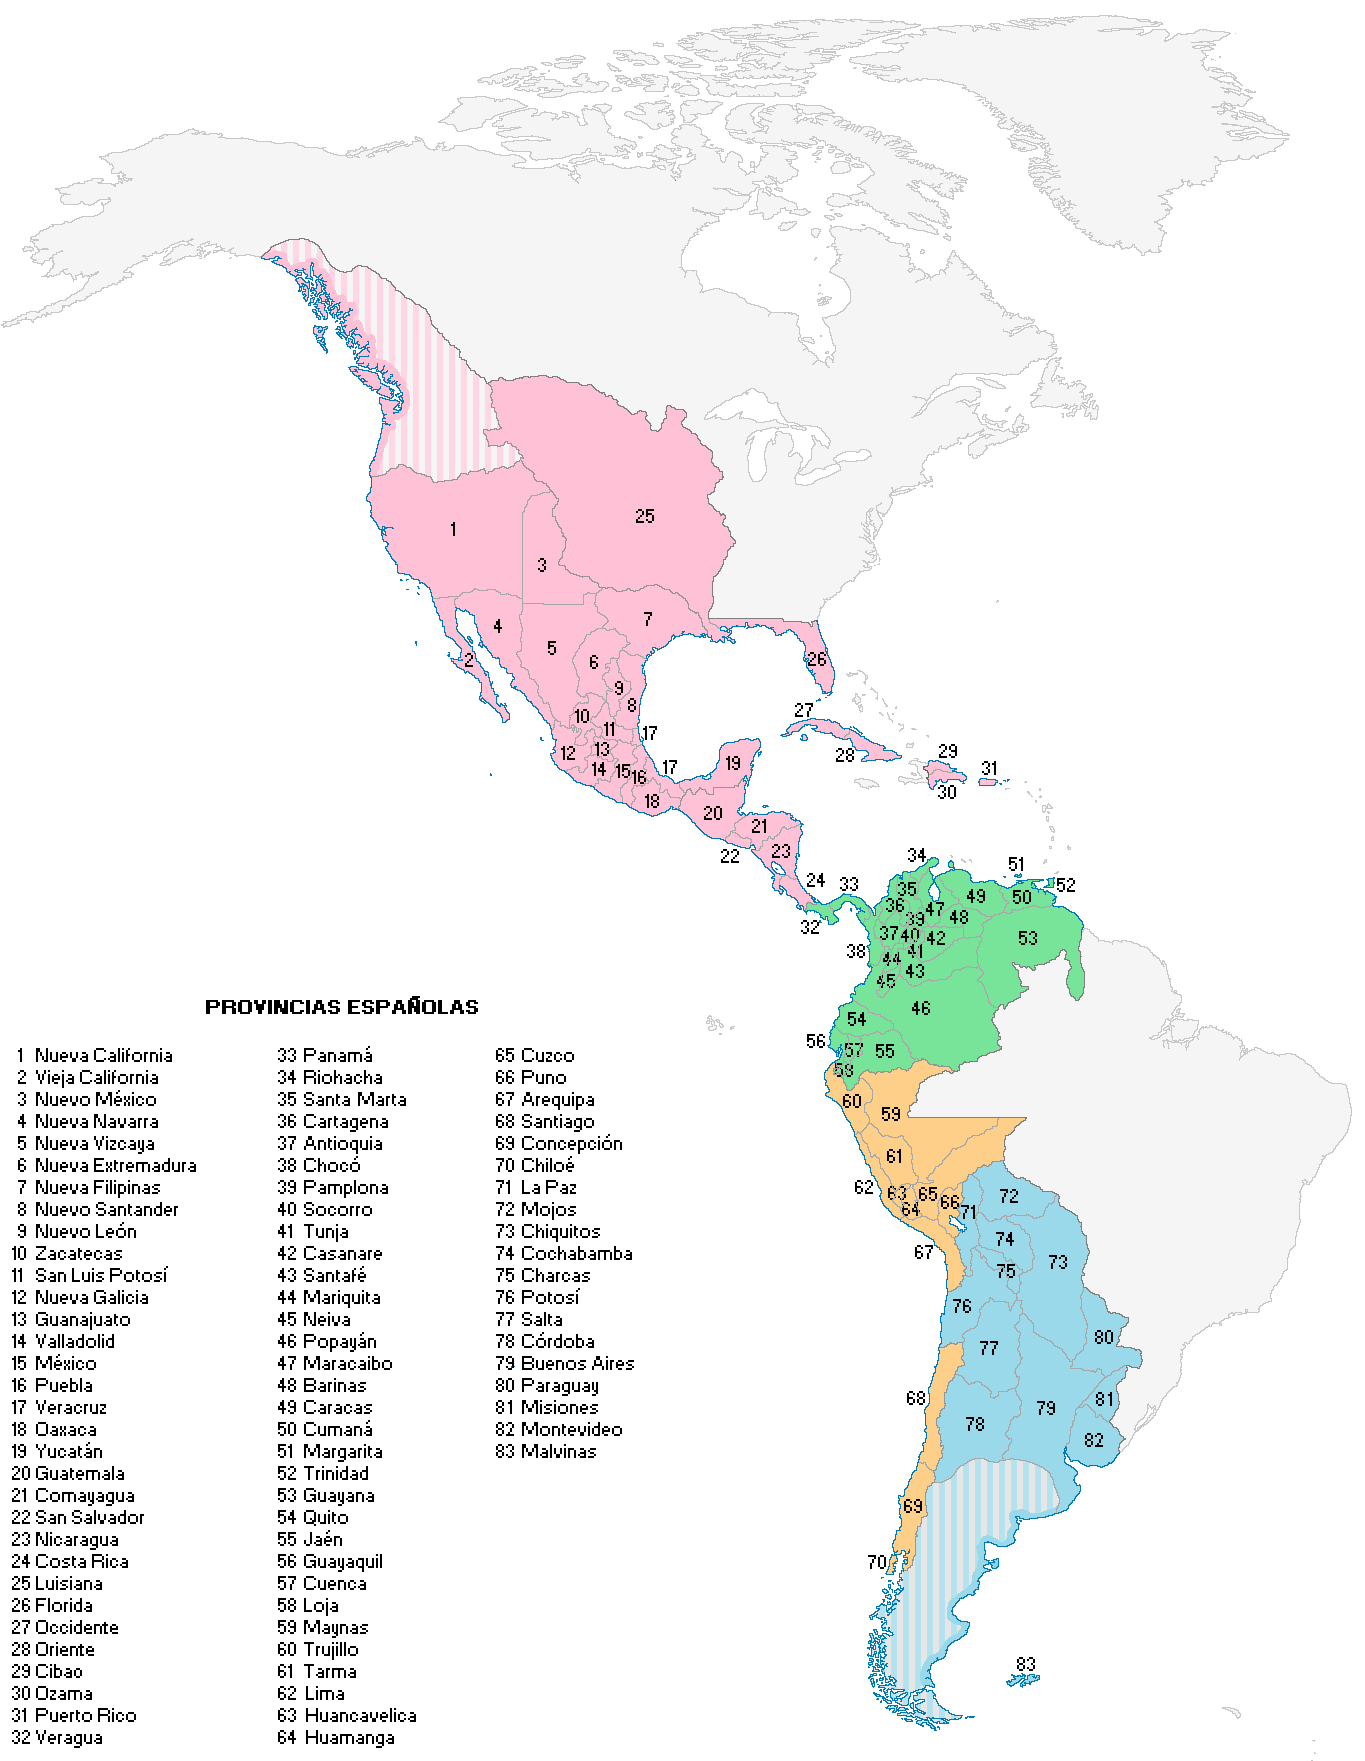 1706502954 119 Spanish Colonies in South America